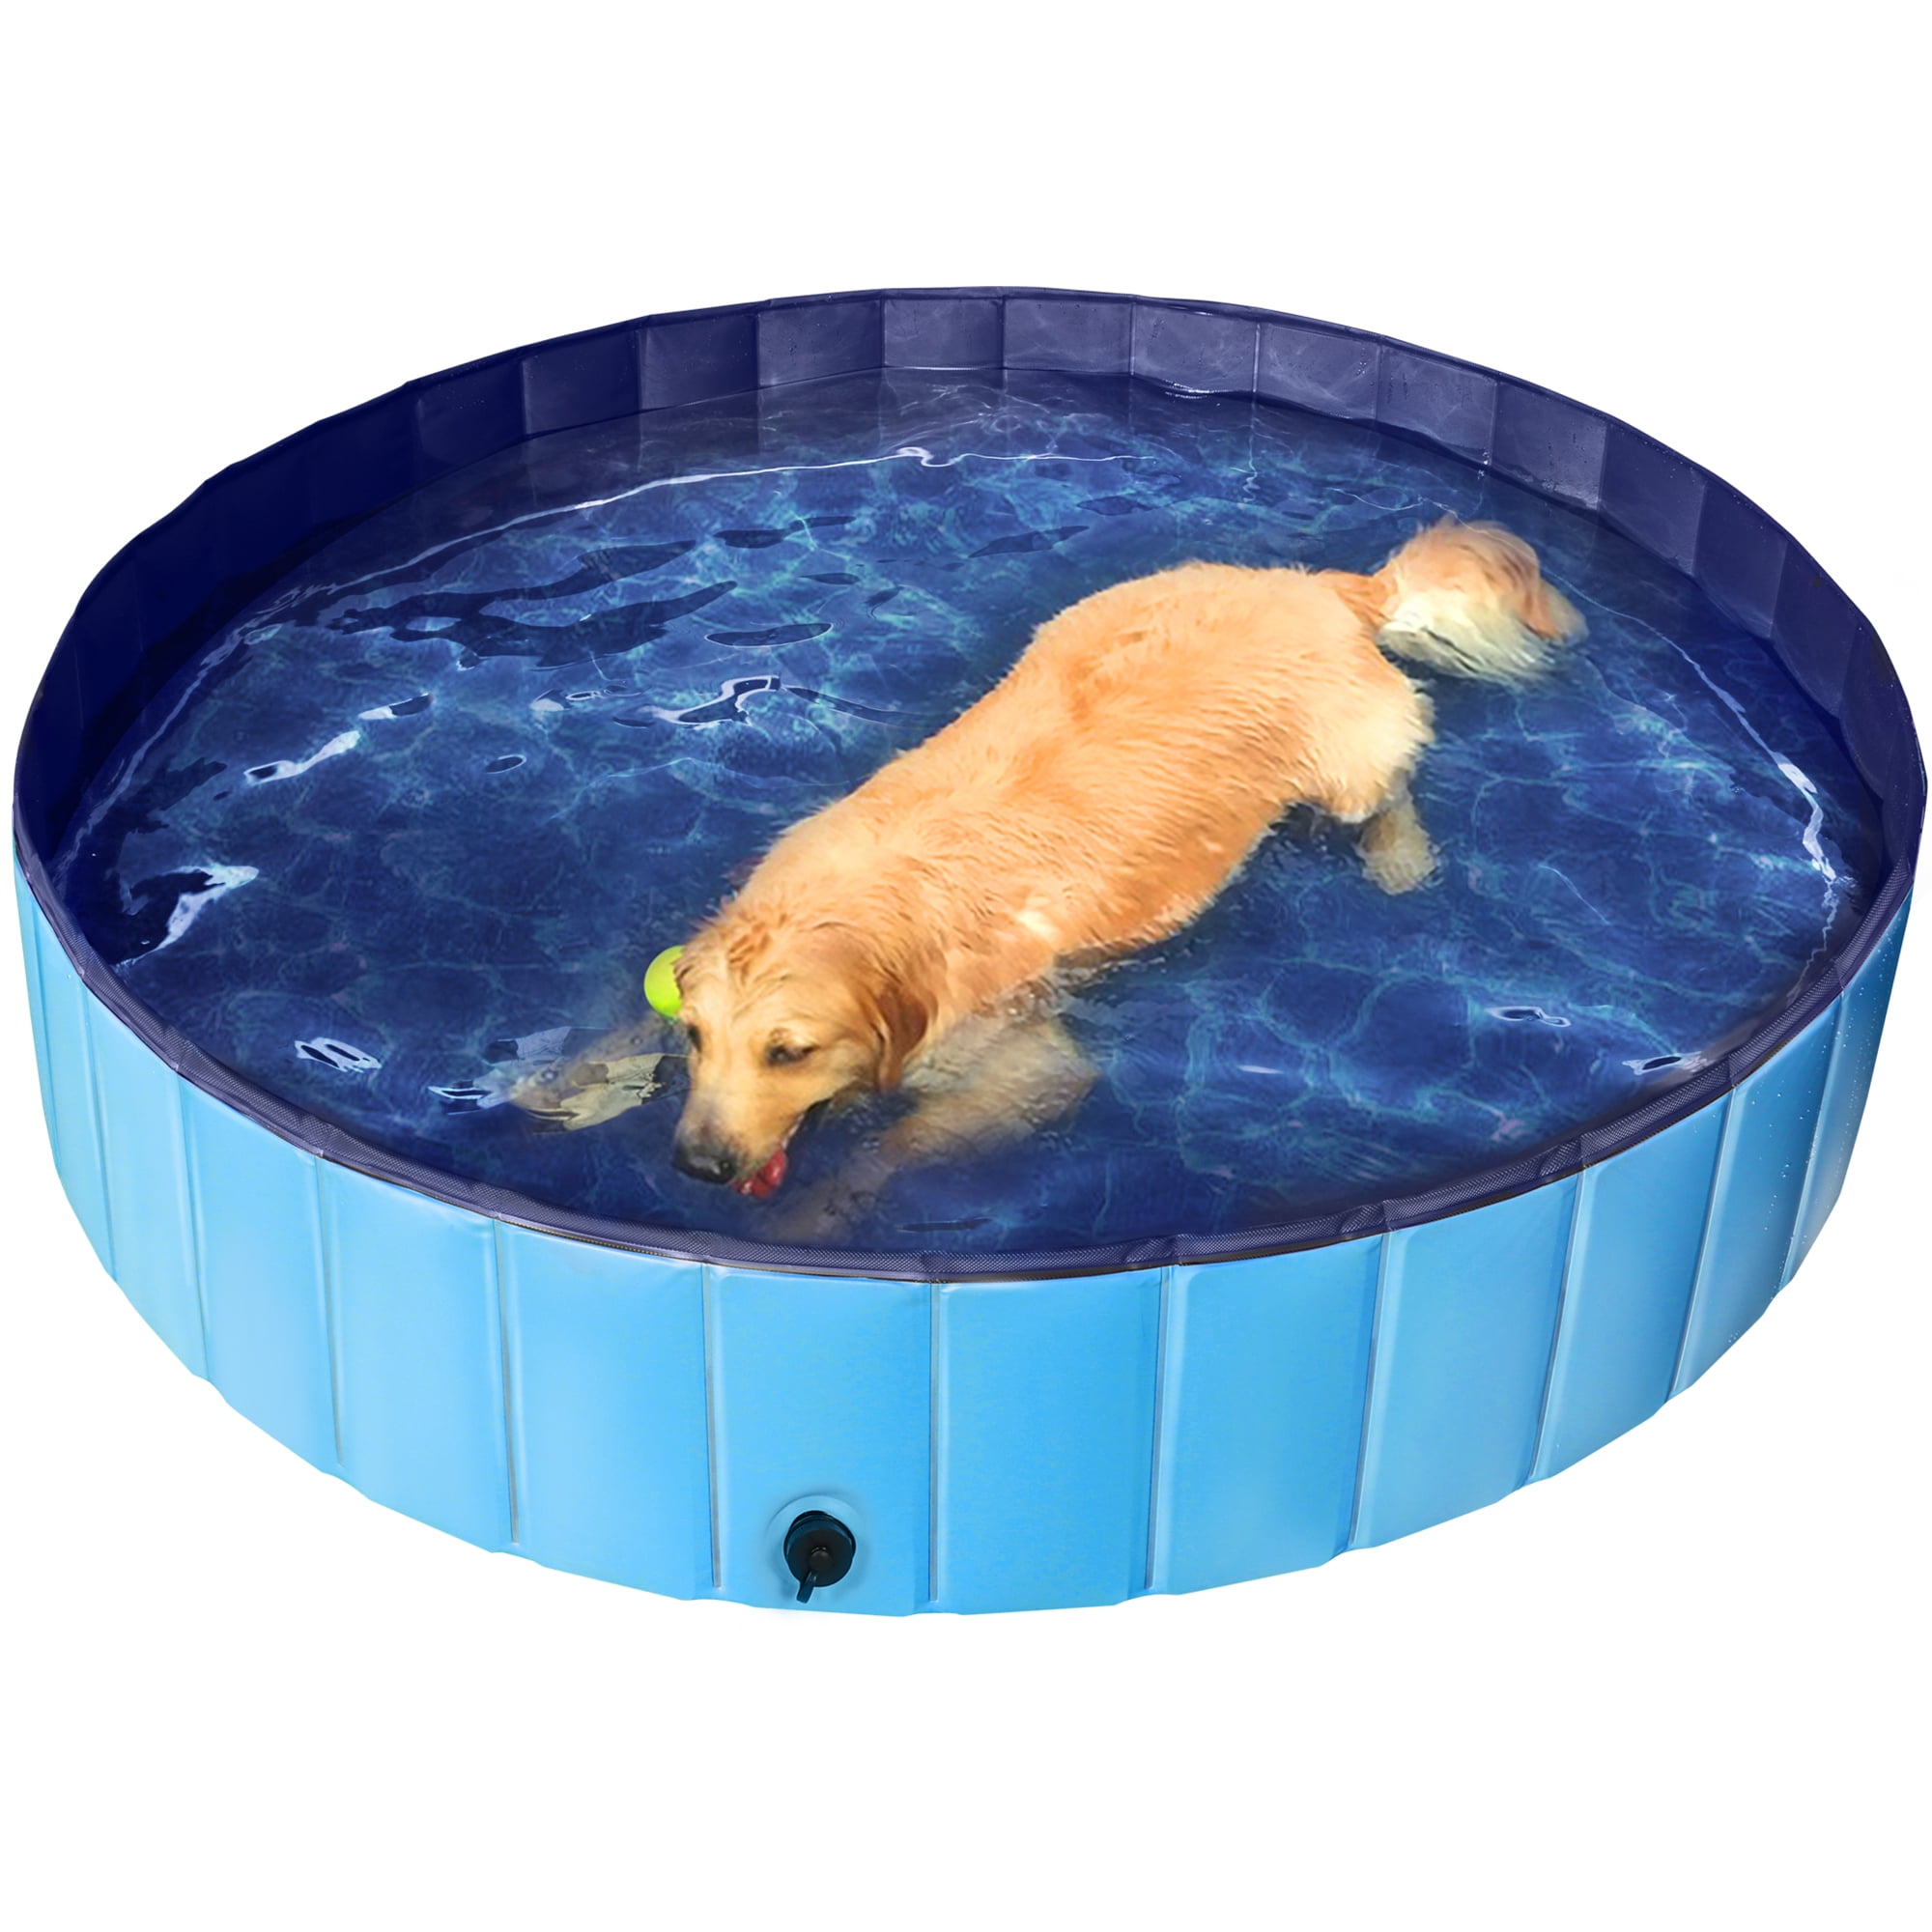 Easyfashion Foldable Pet Swimming Pool Wash Tub for Cats and Dogs, Blue,  XX-Large, 63